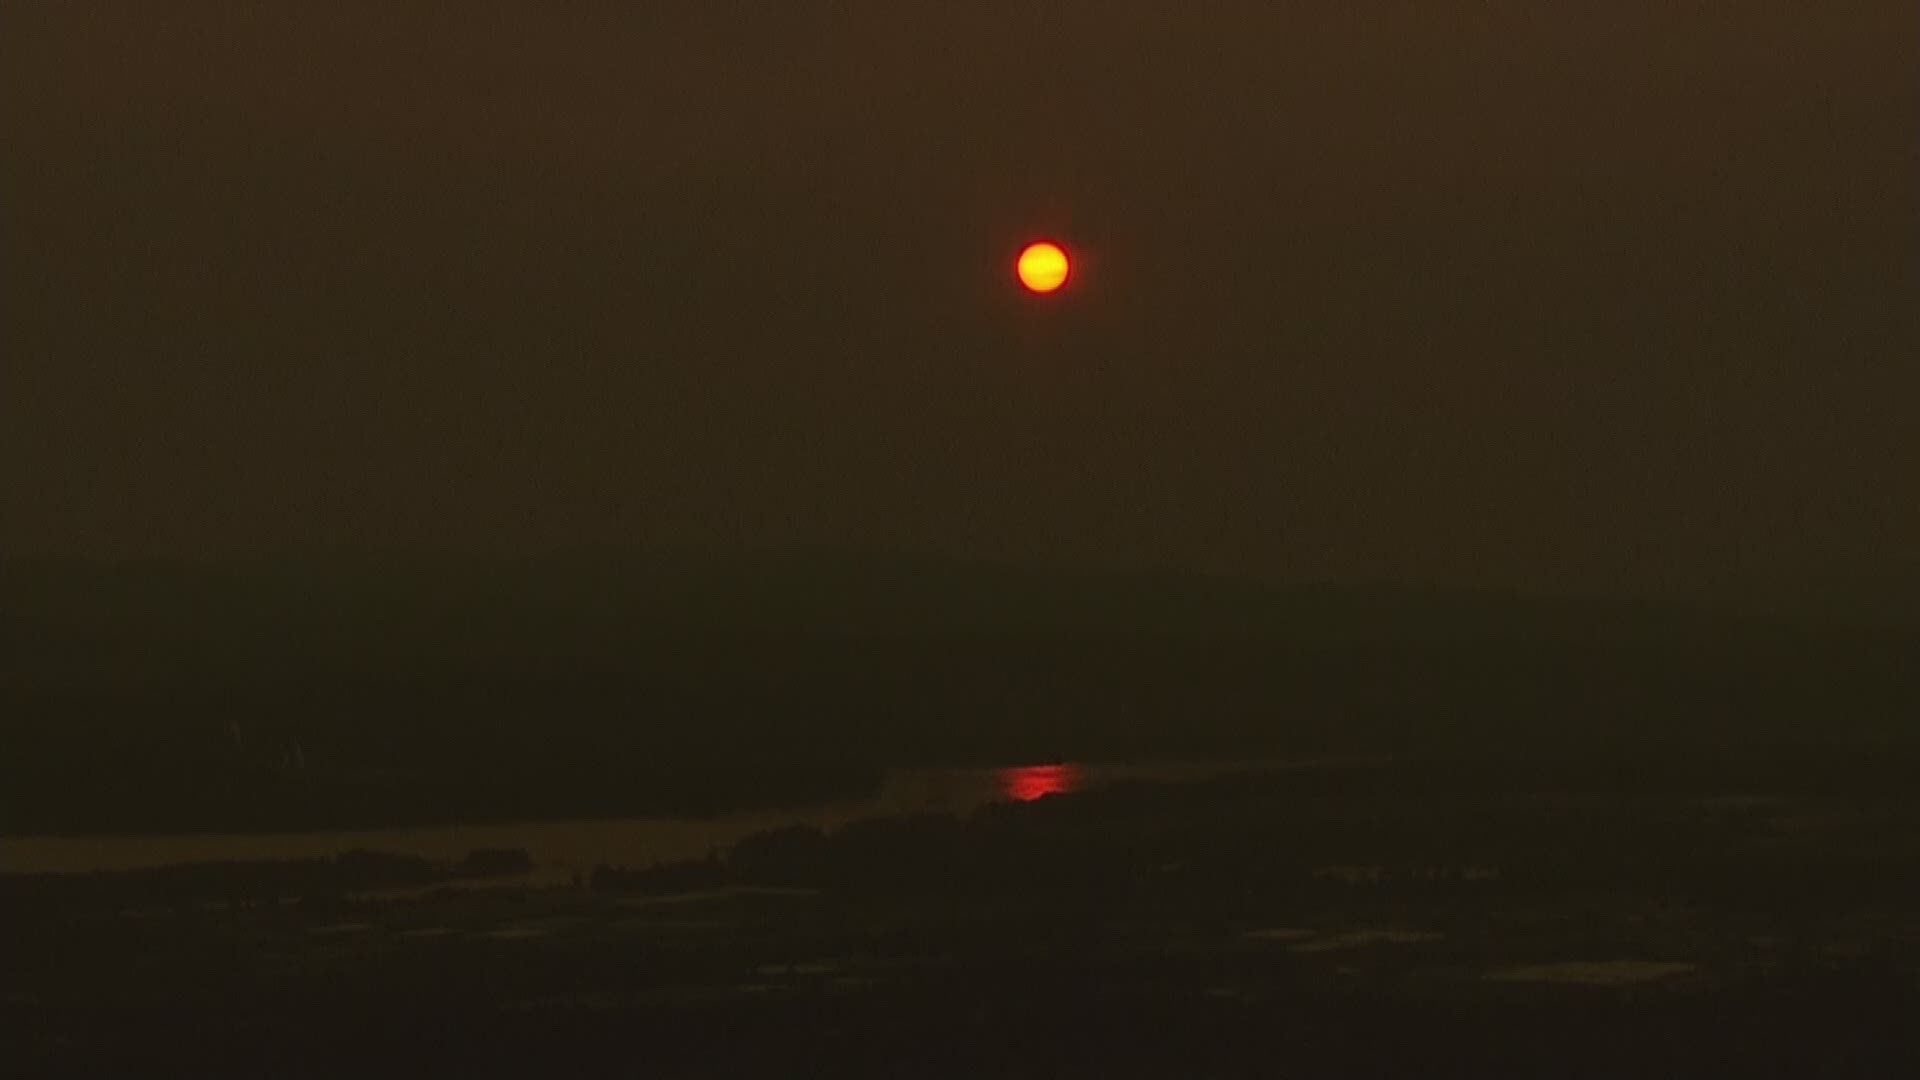 The sun shines in the hazy Portland skies on Monday, July 30, 2018. Video taken by Sky8 for KGW.